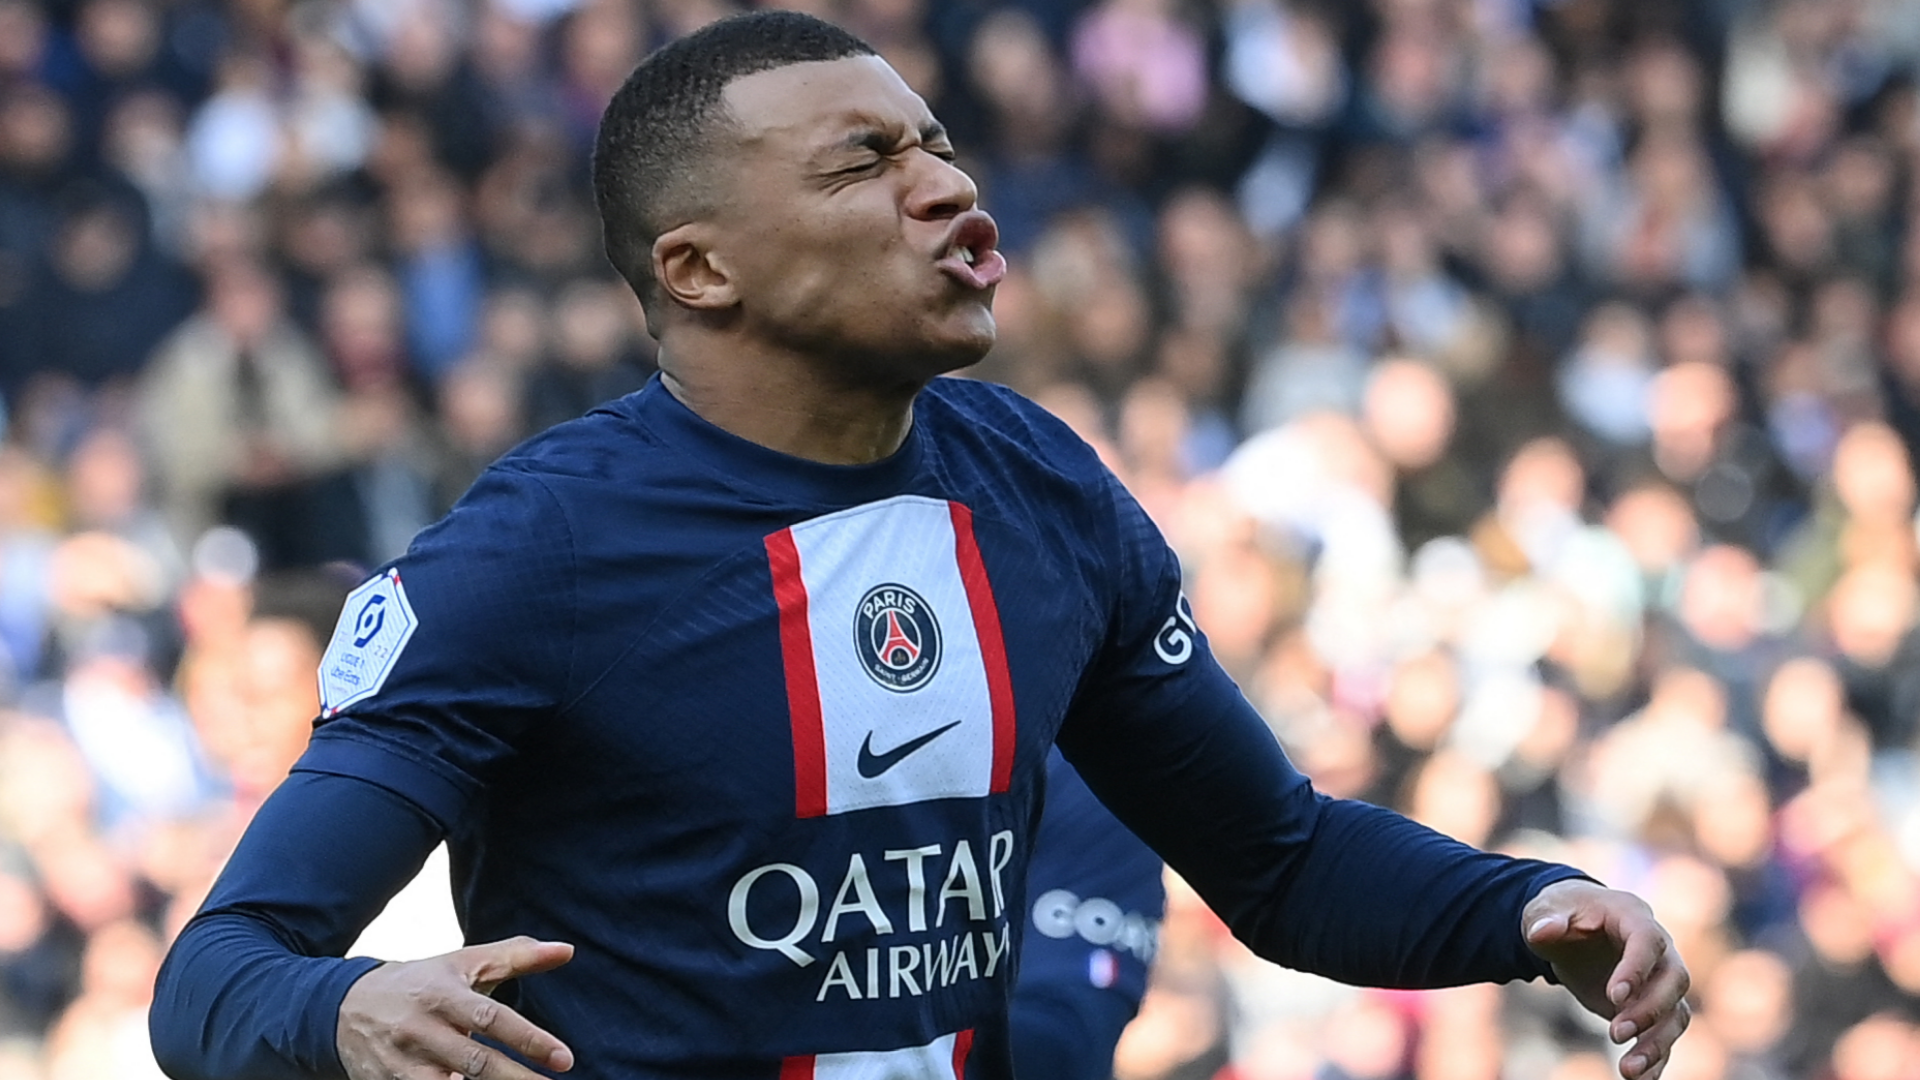 Stop moaning and play the ball -- World Cup winner slams Mbappe